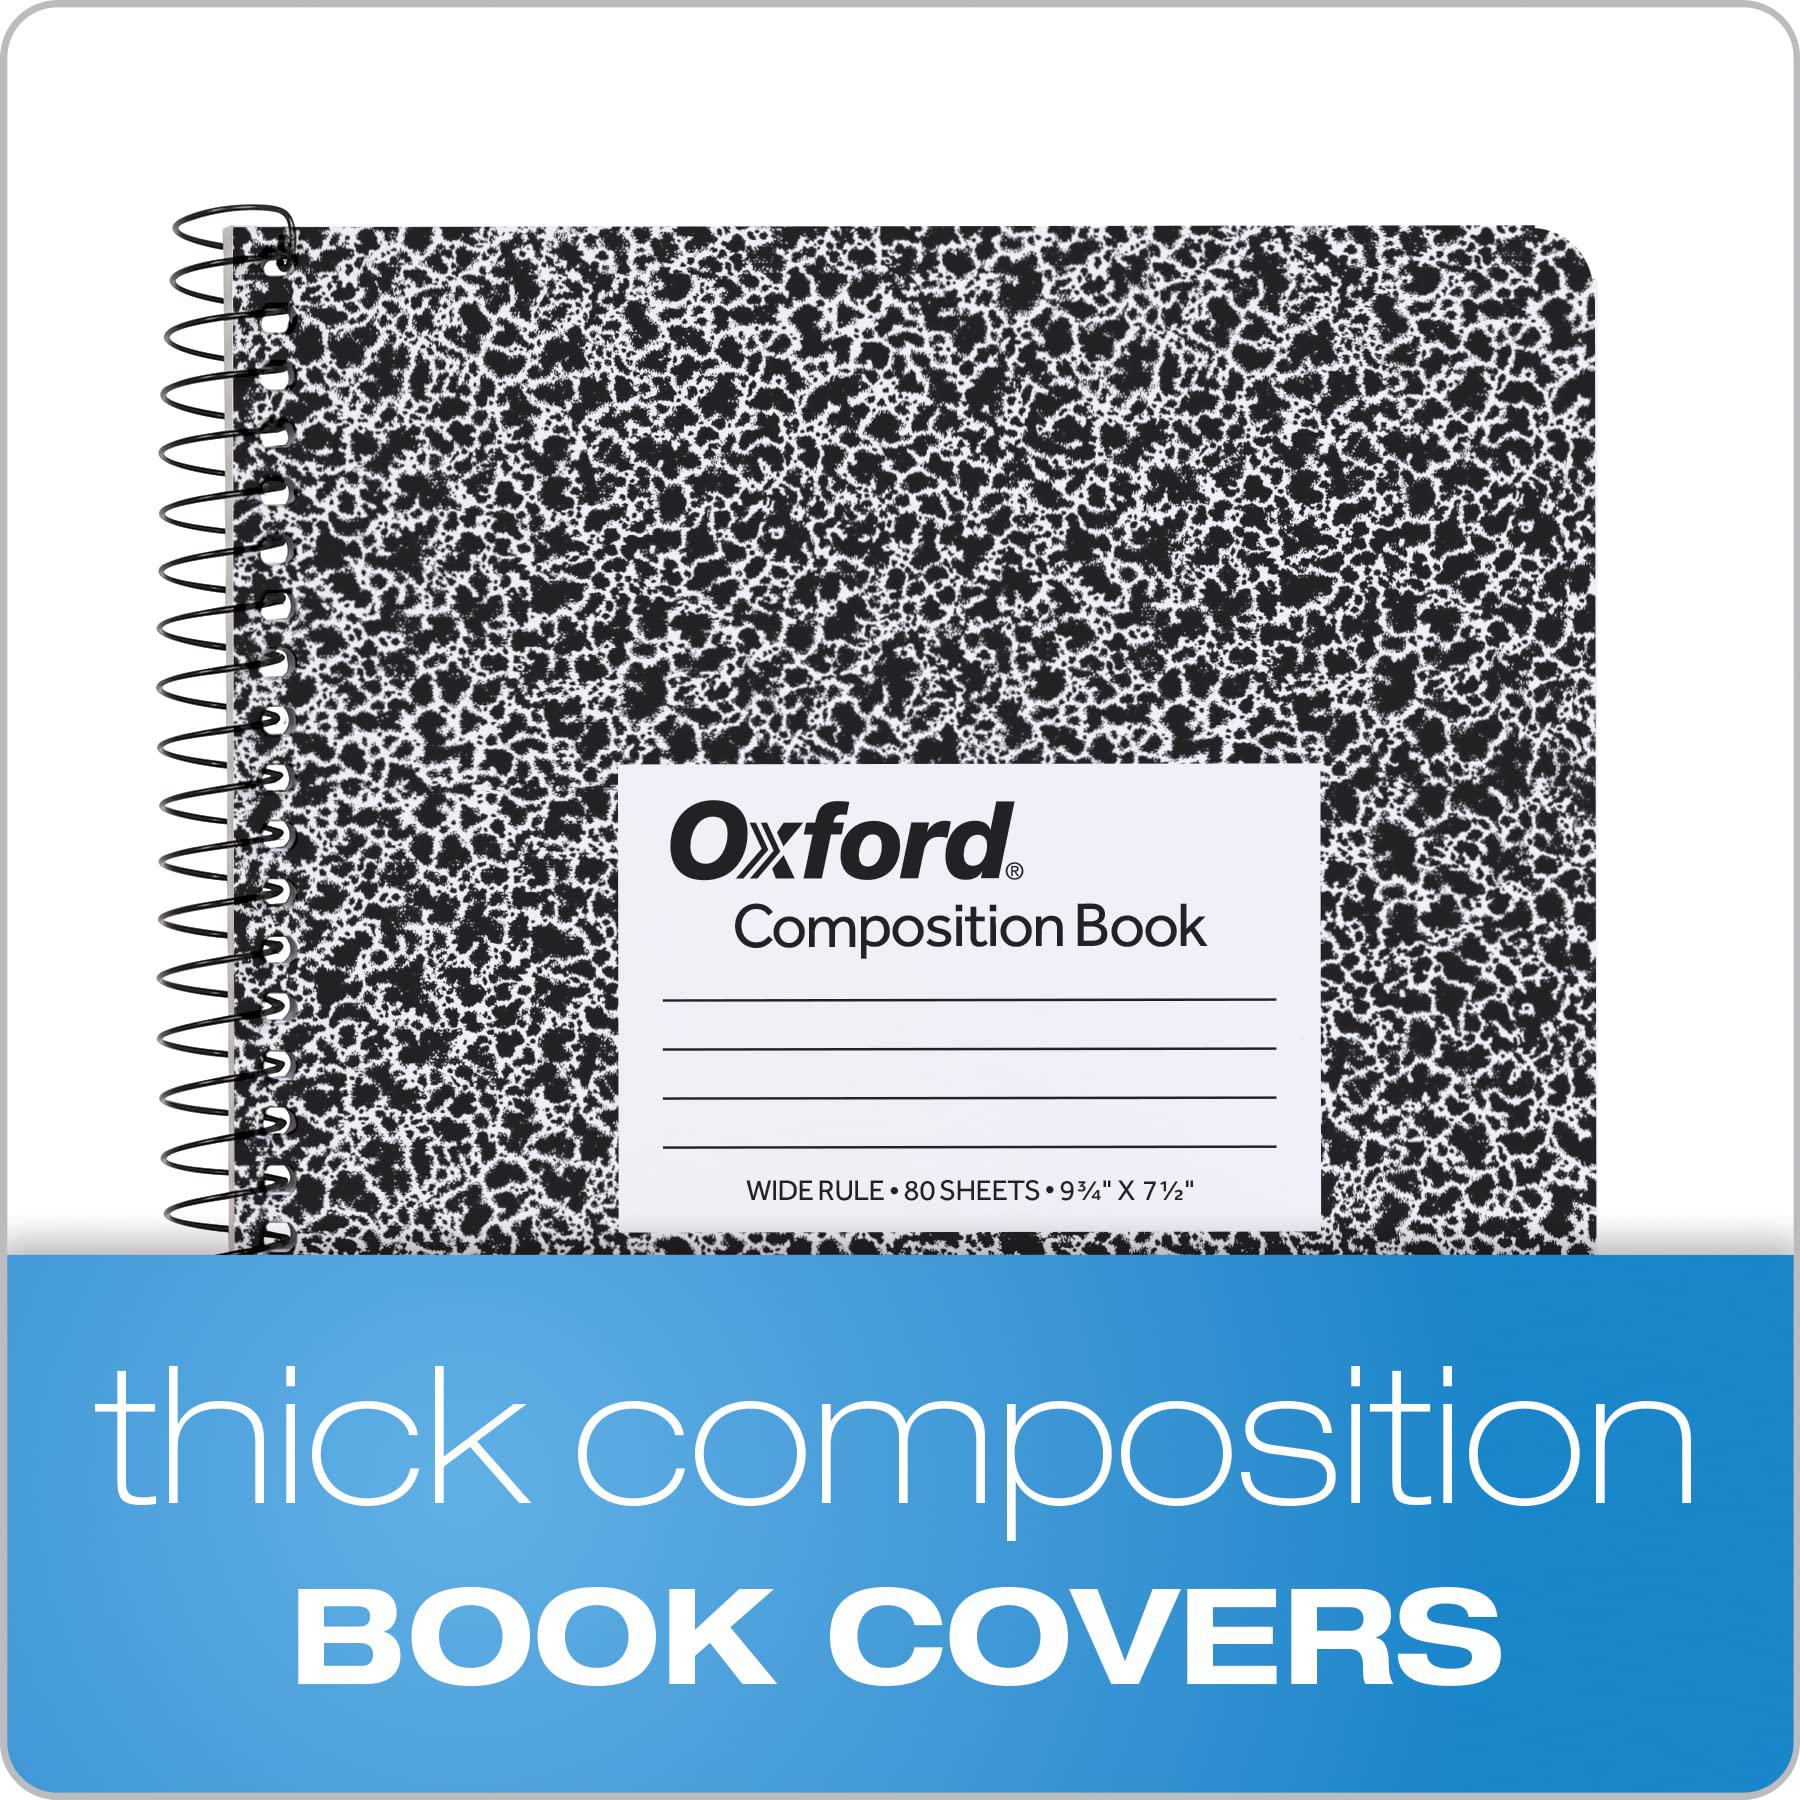 oxford spiral composition notebooks, 4 pack, wide ruled paper, 9-3/4 x 7-1/2 inches, 80 sheets, black marble cover (64950)